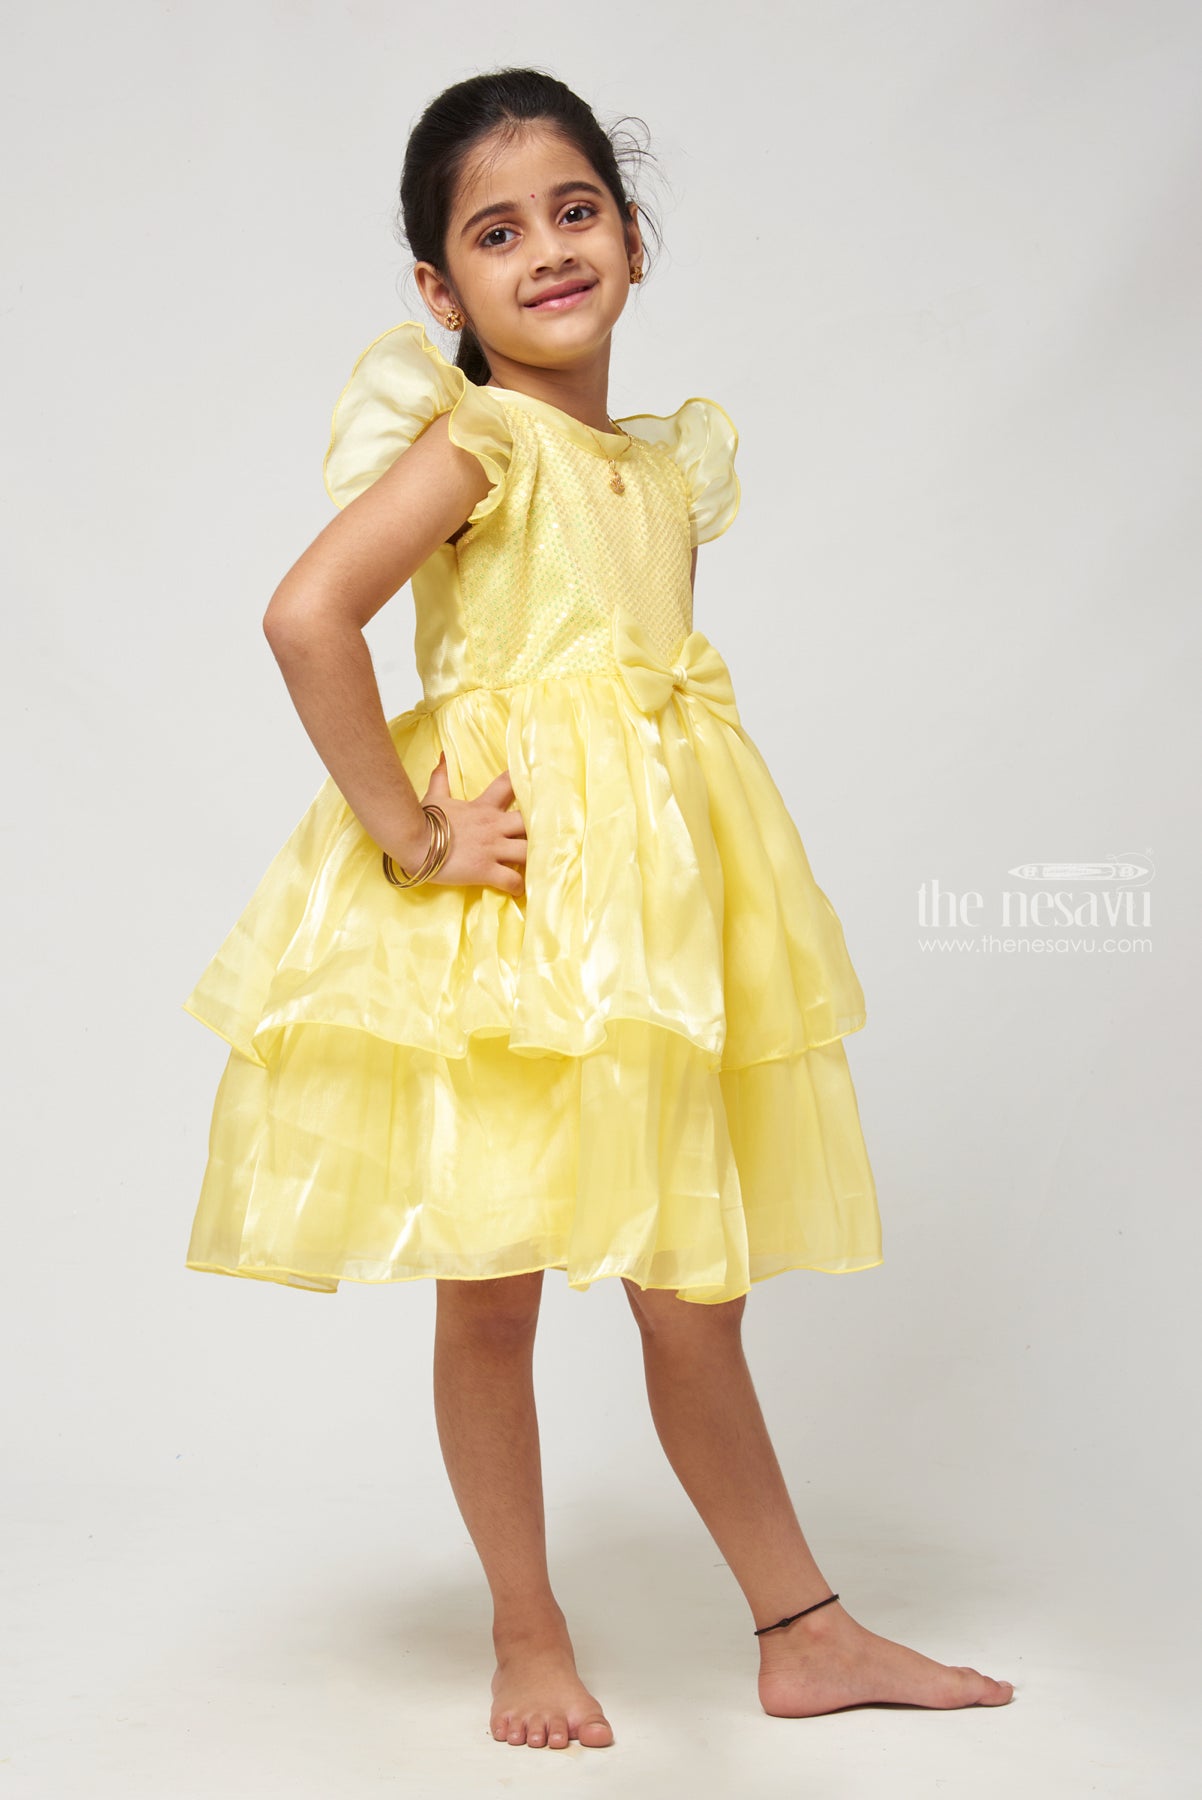 PANSUDI BABY FROCK AND DRESS FOR KIDS GIRLS - Fashion Wear